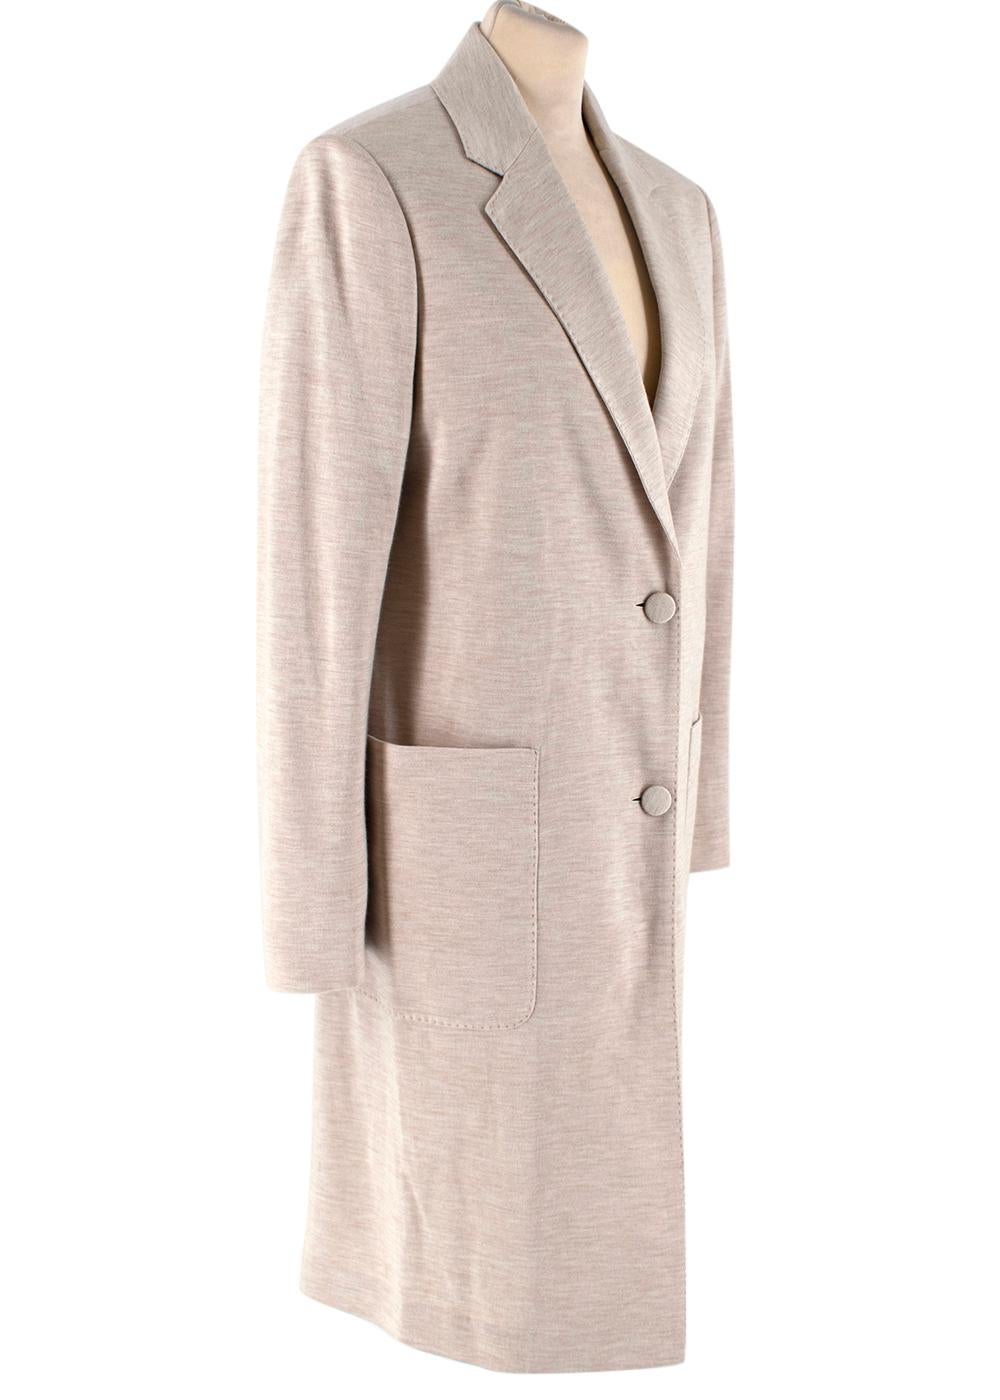 Agnona Beige Silk & Cashmere Blend Jersey Coat

-Made of a super soft cashmere and silk blend jersey fabric 
-Classic elegant cut 
-Gorgeous neutral hue 
-Pockets to the side 
-Button fastening to the front 
-Top stitching details 
-Partially lined